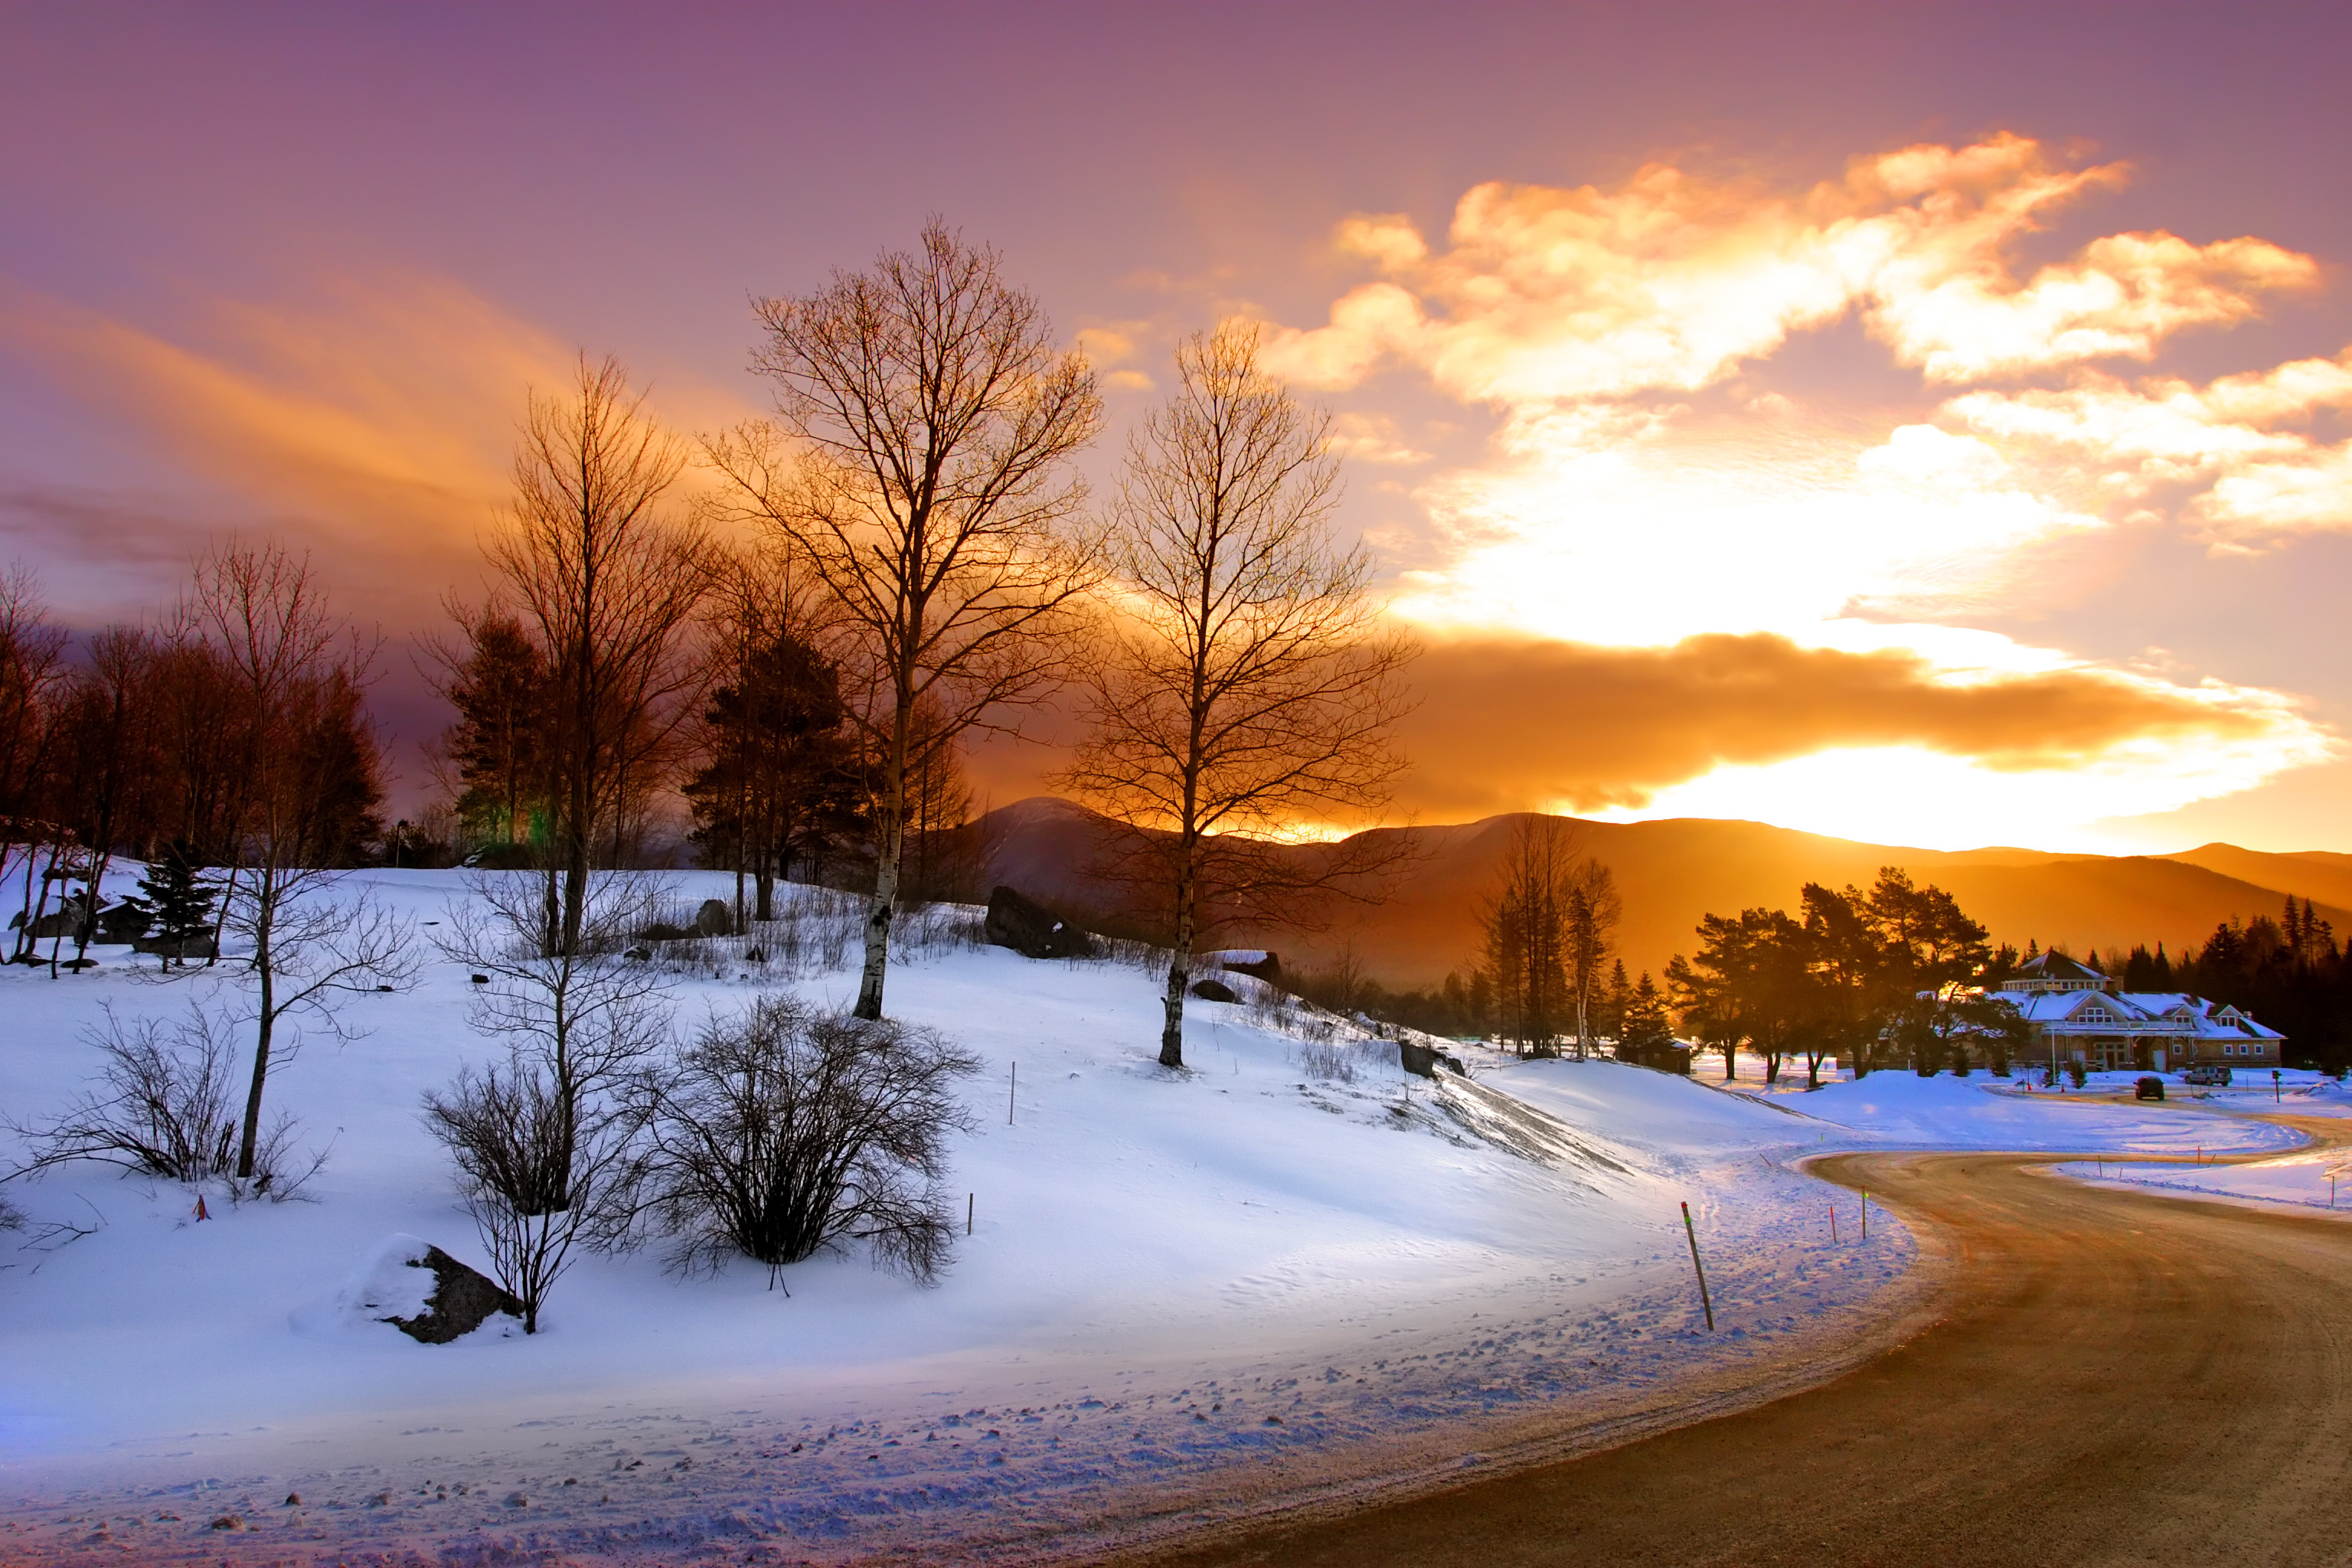 A sunset with purple and orange colors over a snowy street. Mountains are in the background.